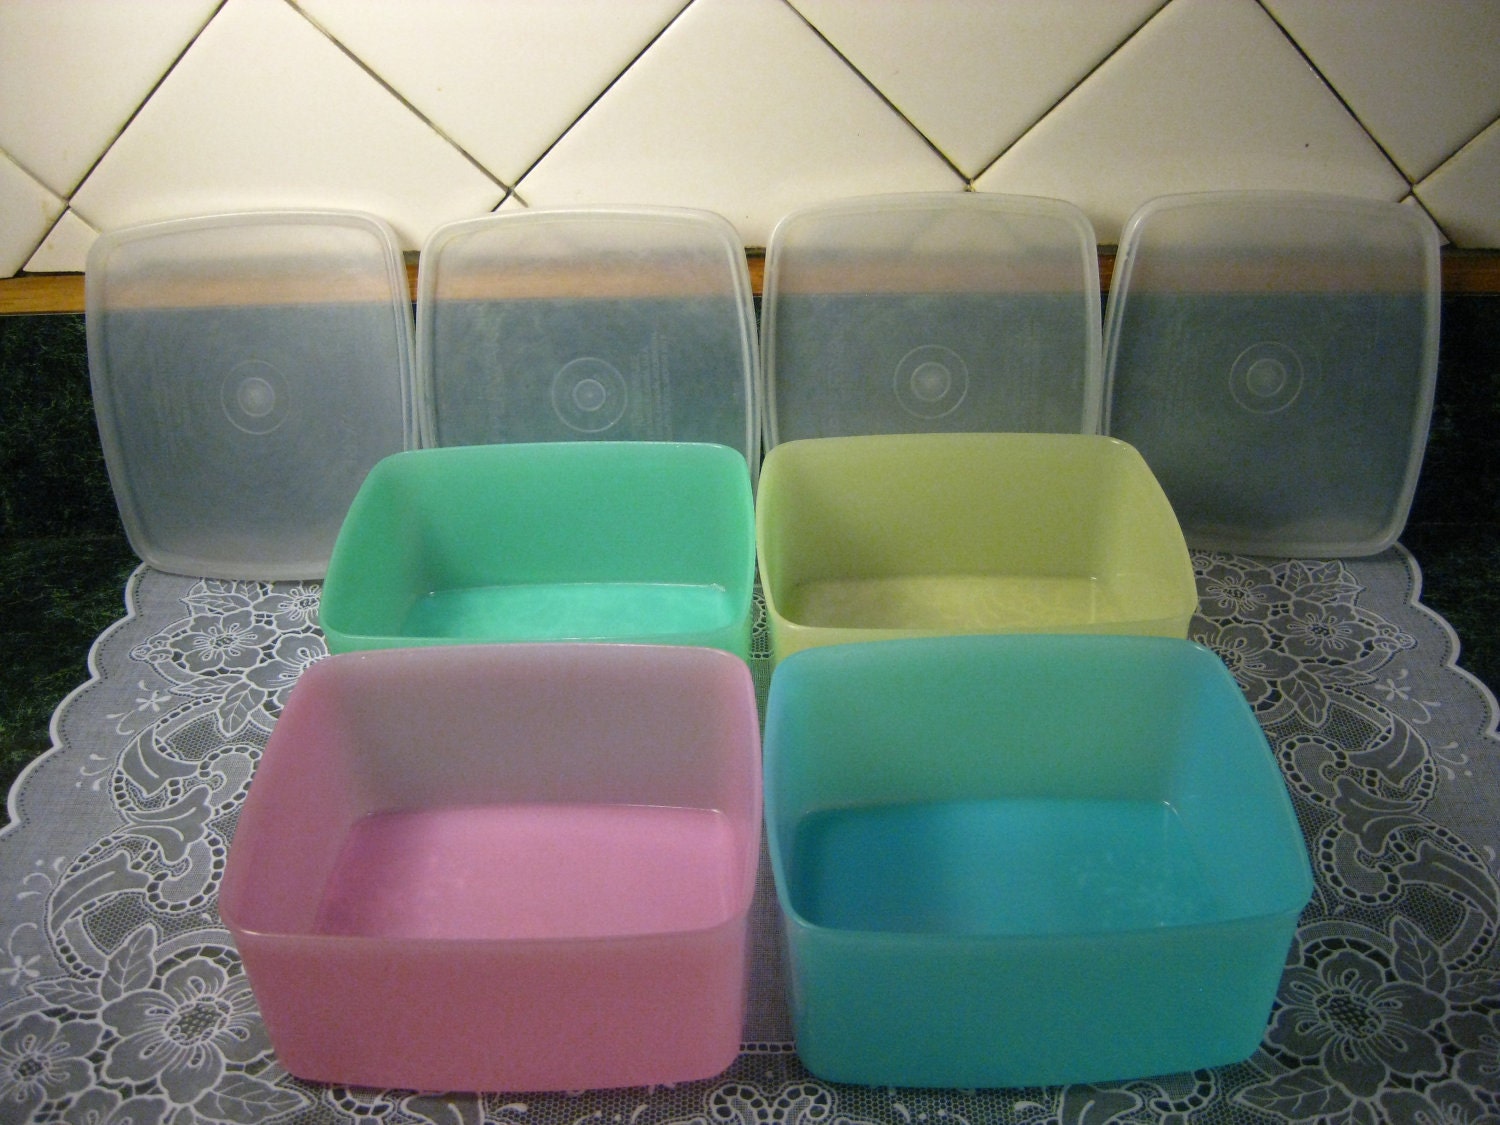 Vintage Tupperware: Four Square Containers With Lids